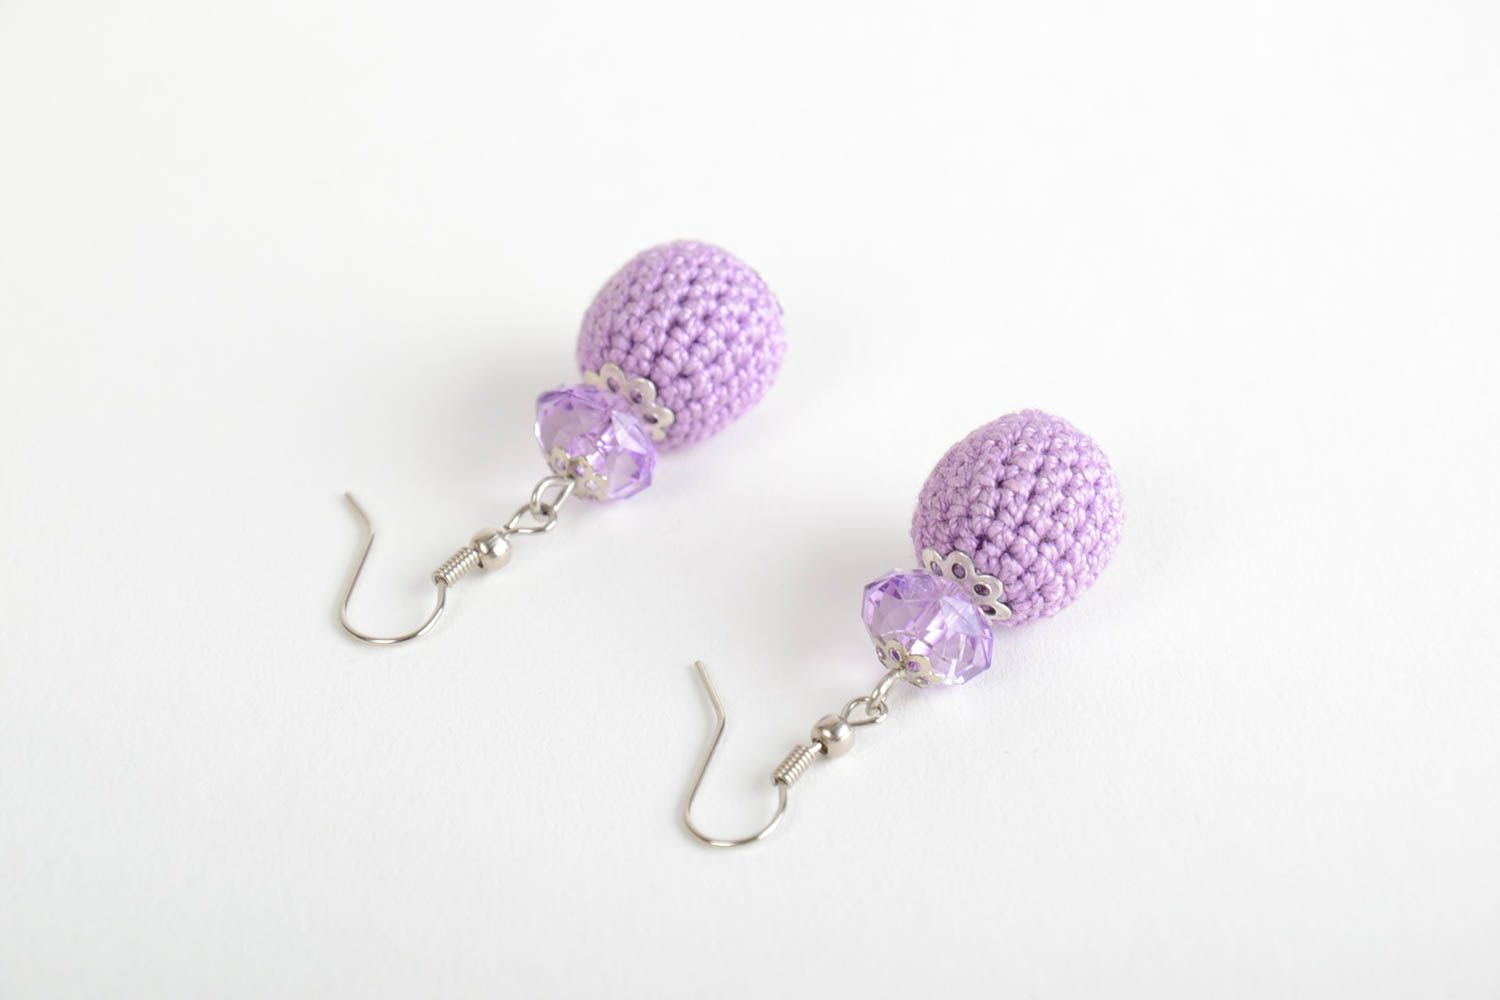 Handmade wooden bead earrings crocheted over with violet cotton threads photo 4